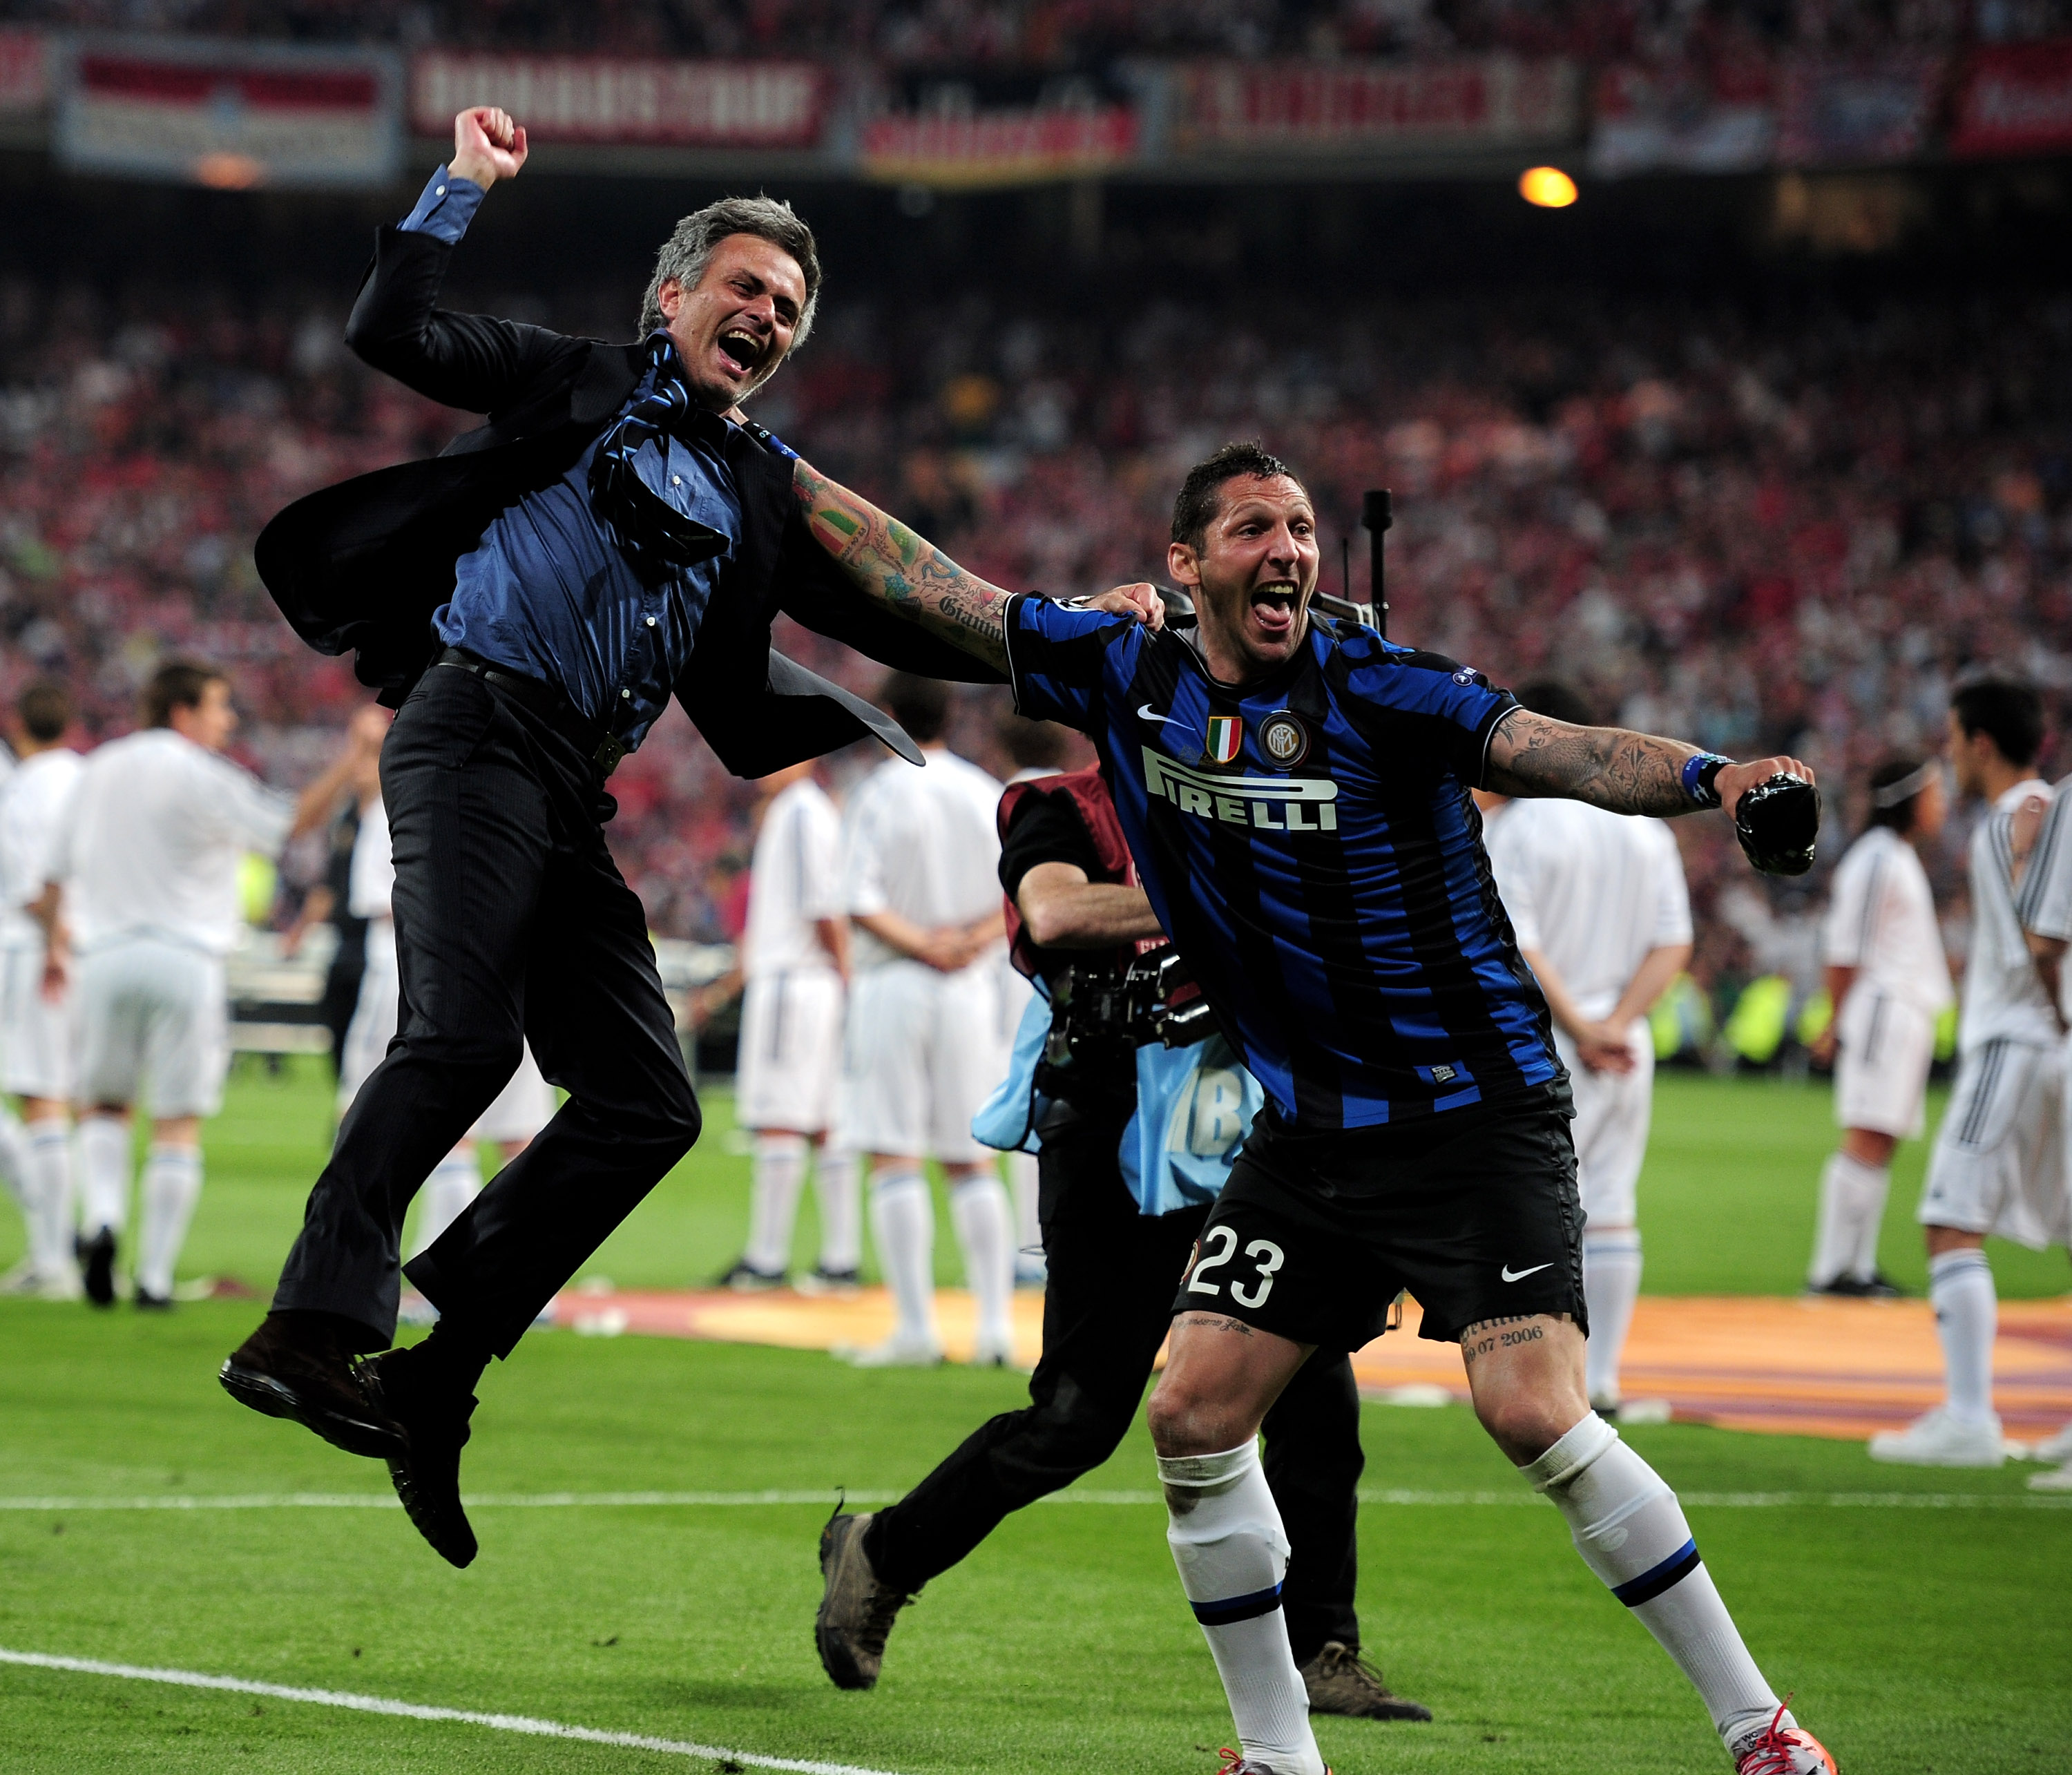 MADRID, SPAIN - MAY 22:  Head coach Jose Mourinho (L) and Marco Materazzi of Inter Milan celebrate their team's victory at the end of the UEFA Champions League Final match between FC Bayern Muenchen and Inter Milan at the Estadio Santiago Bernabeu on May